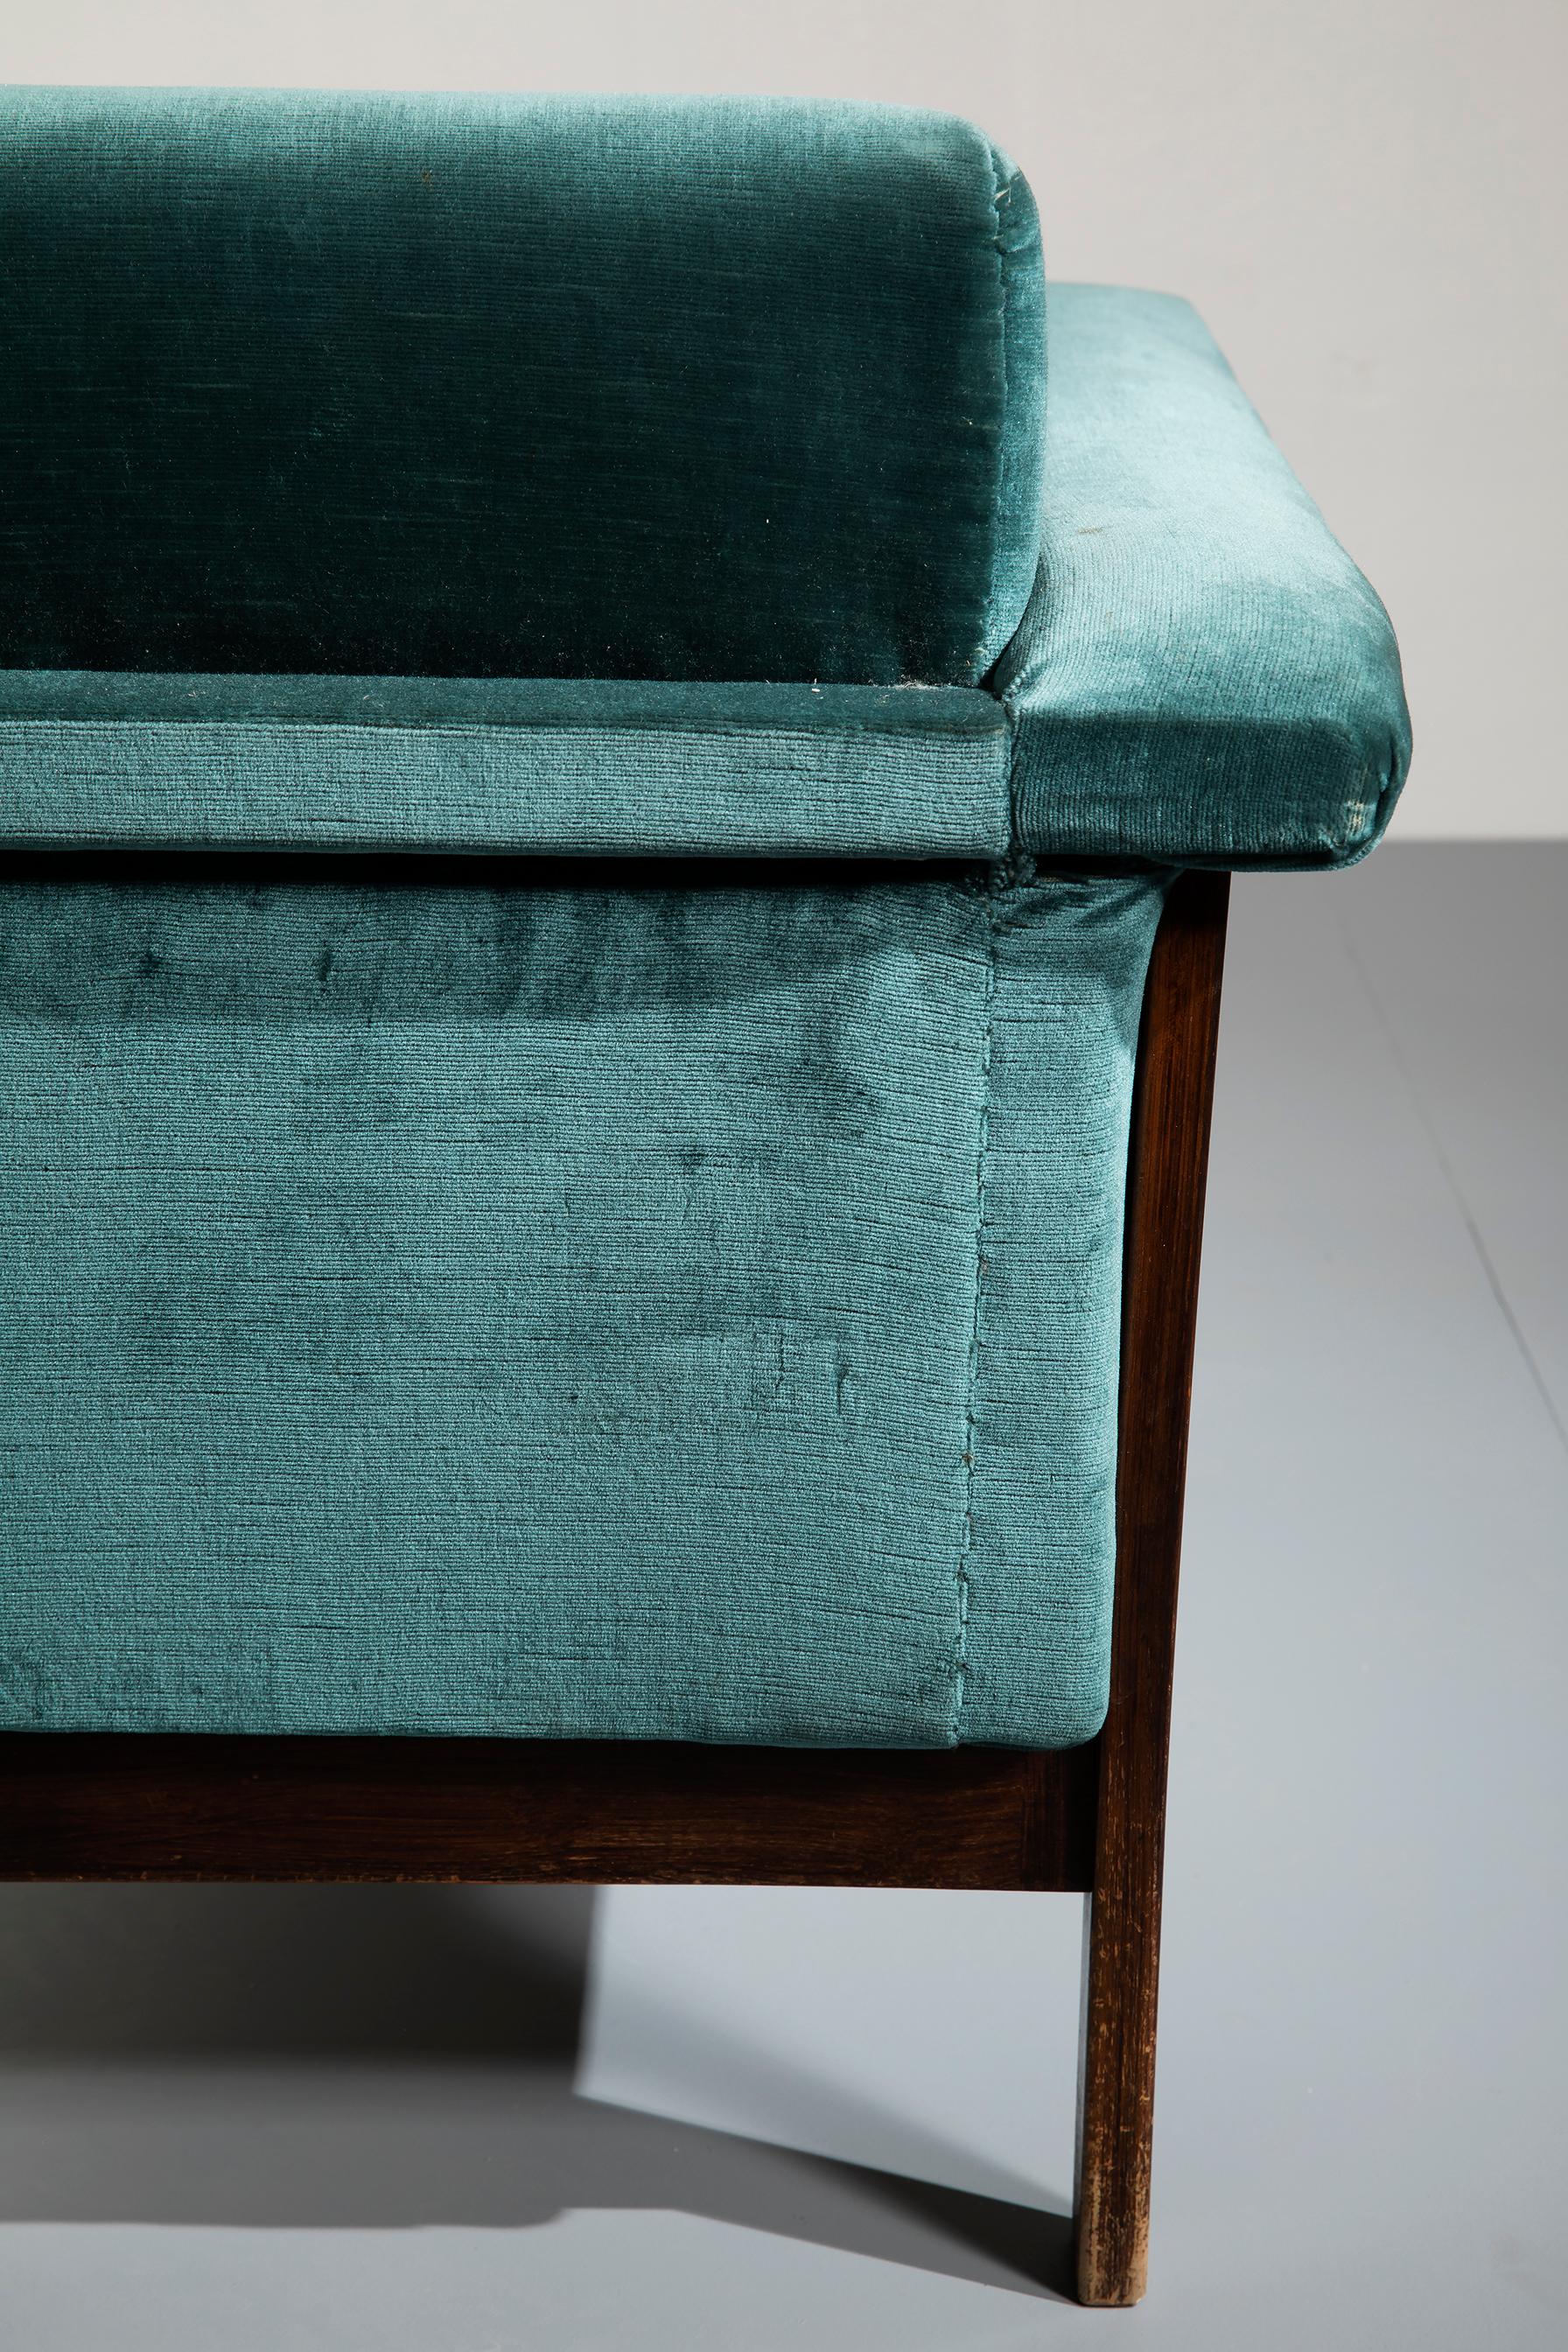 Ettore Sottsass Rosewood and Teal Fabric 'Canada' Armchair for Poltronova, 1958 For Sale 8